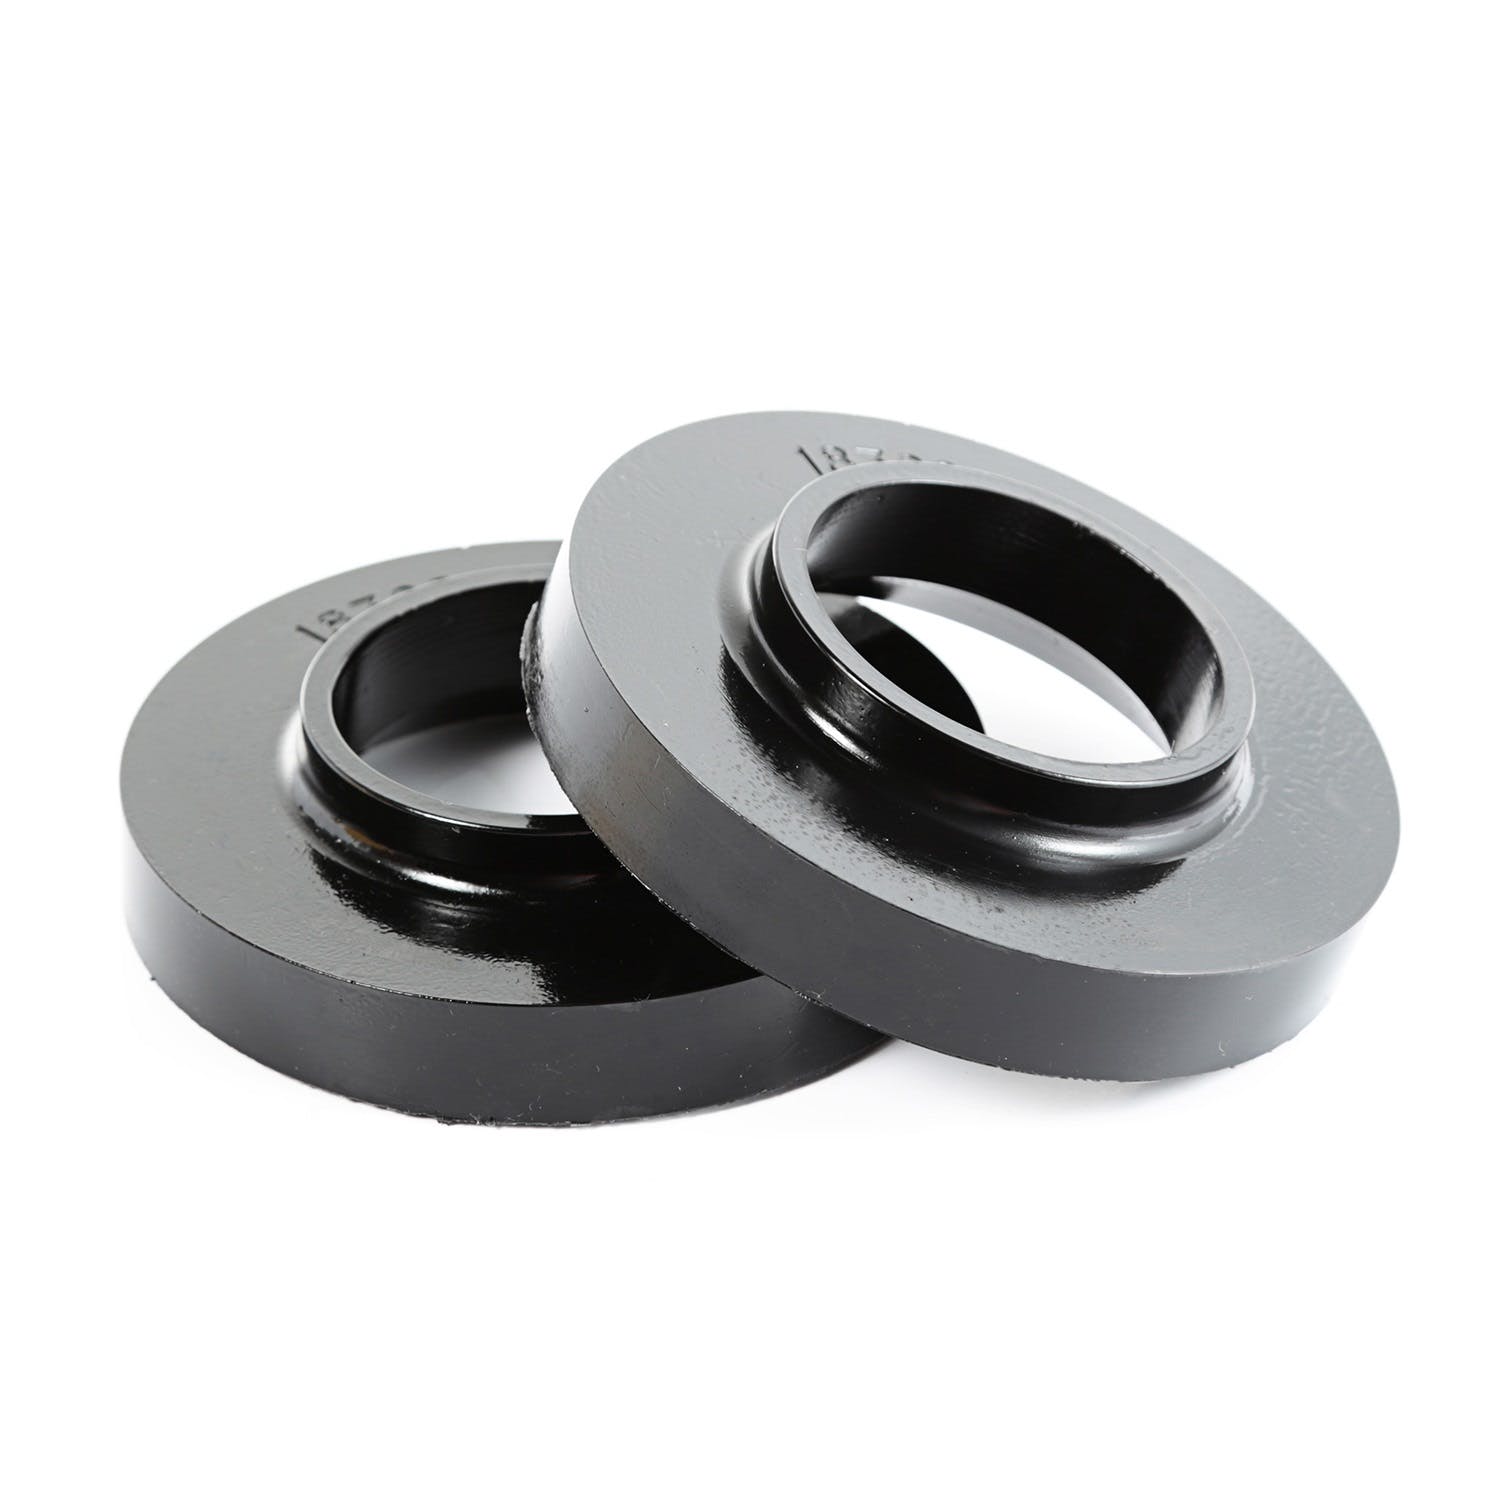 Rugged Ridge 18360.04 Front Spacer Leveling Kit, 0.75-Inch